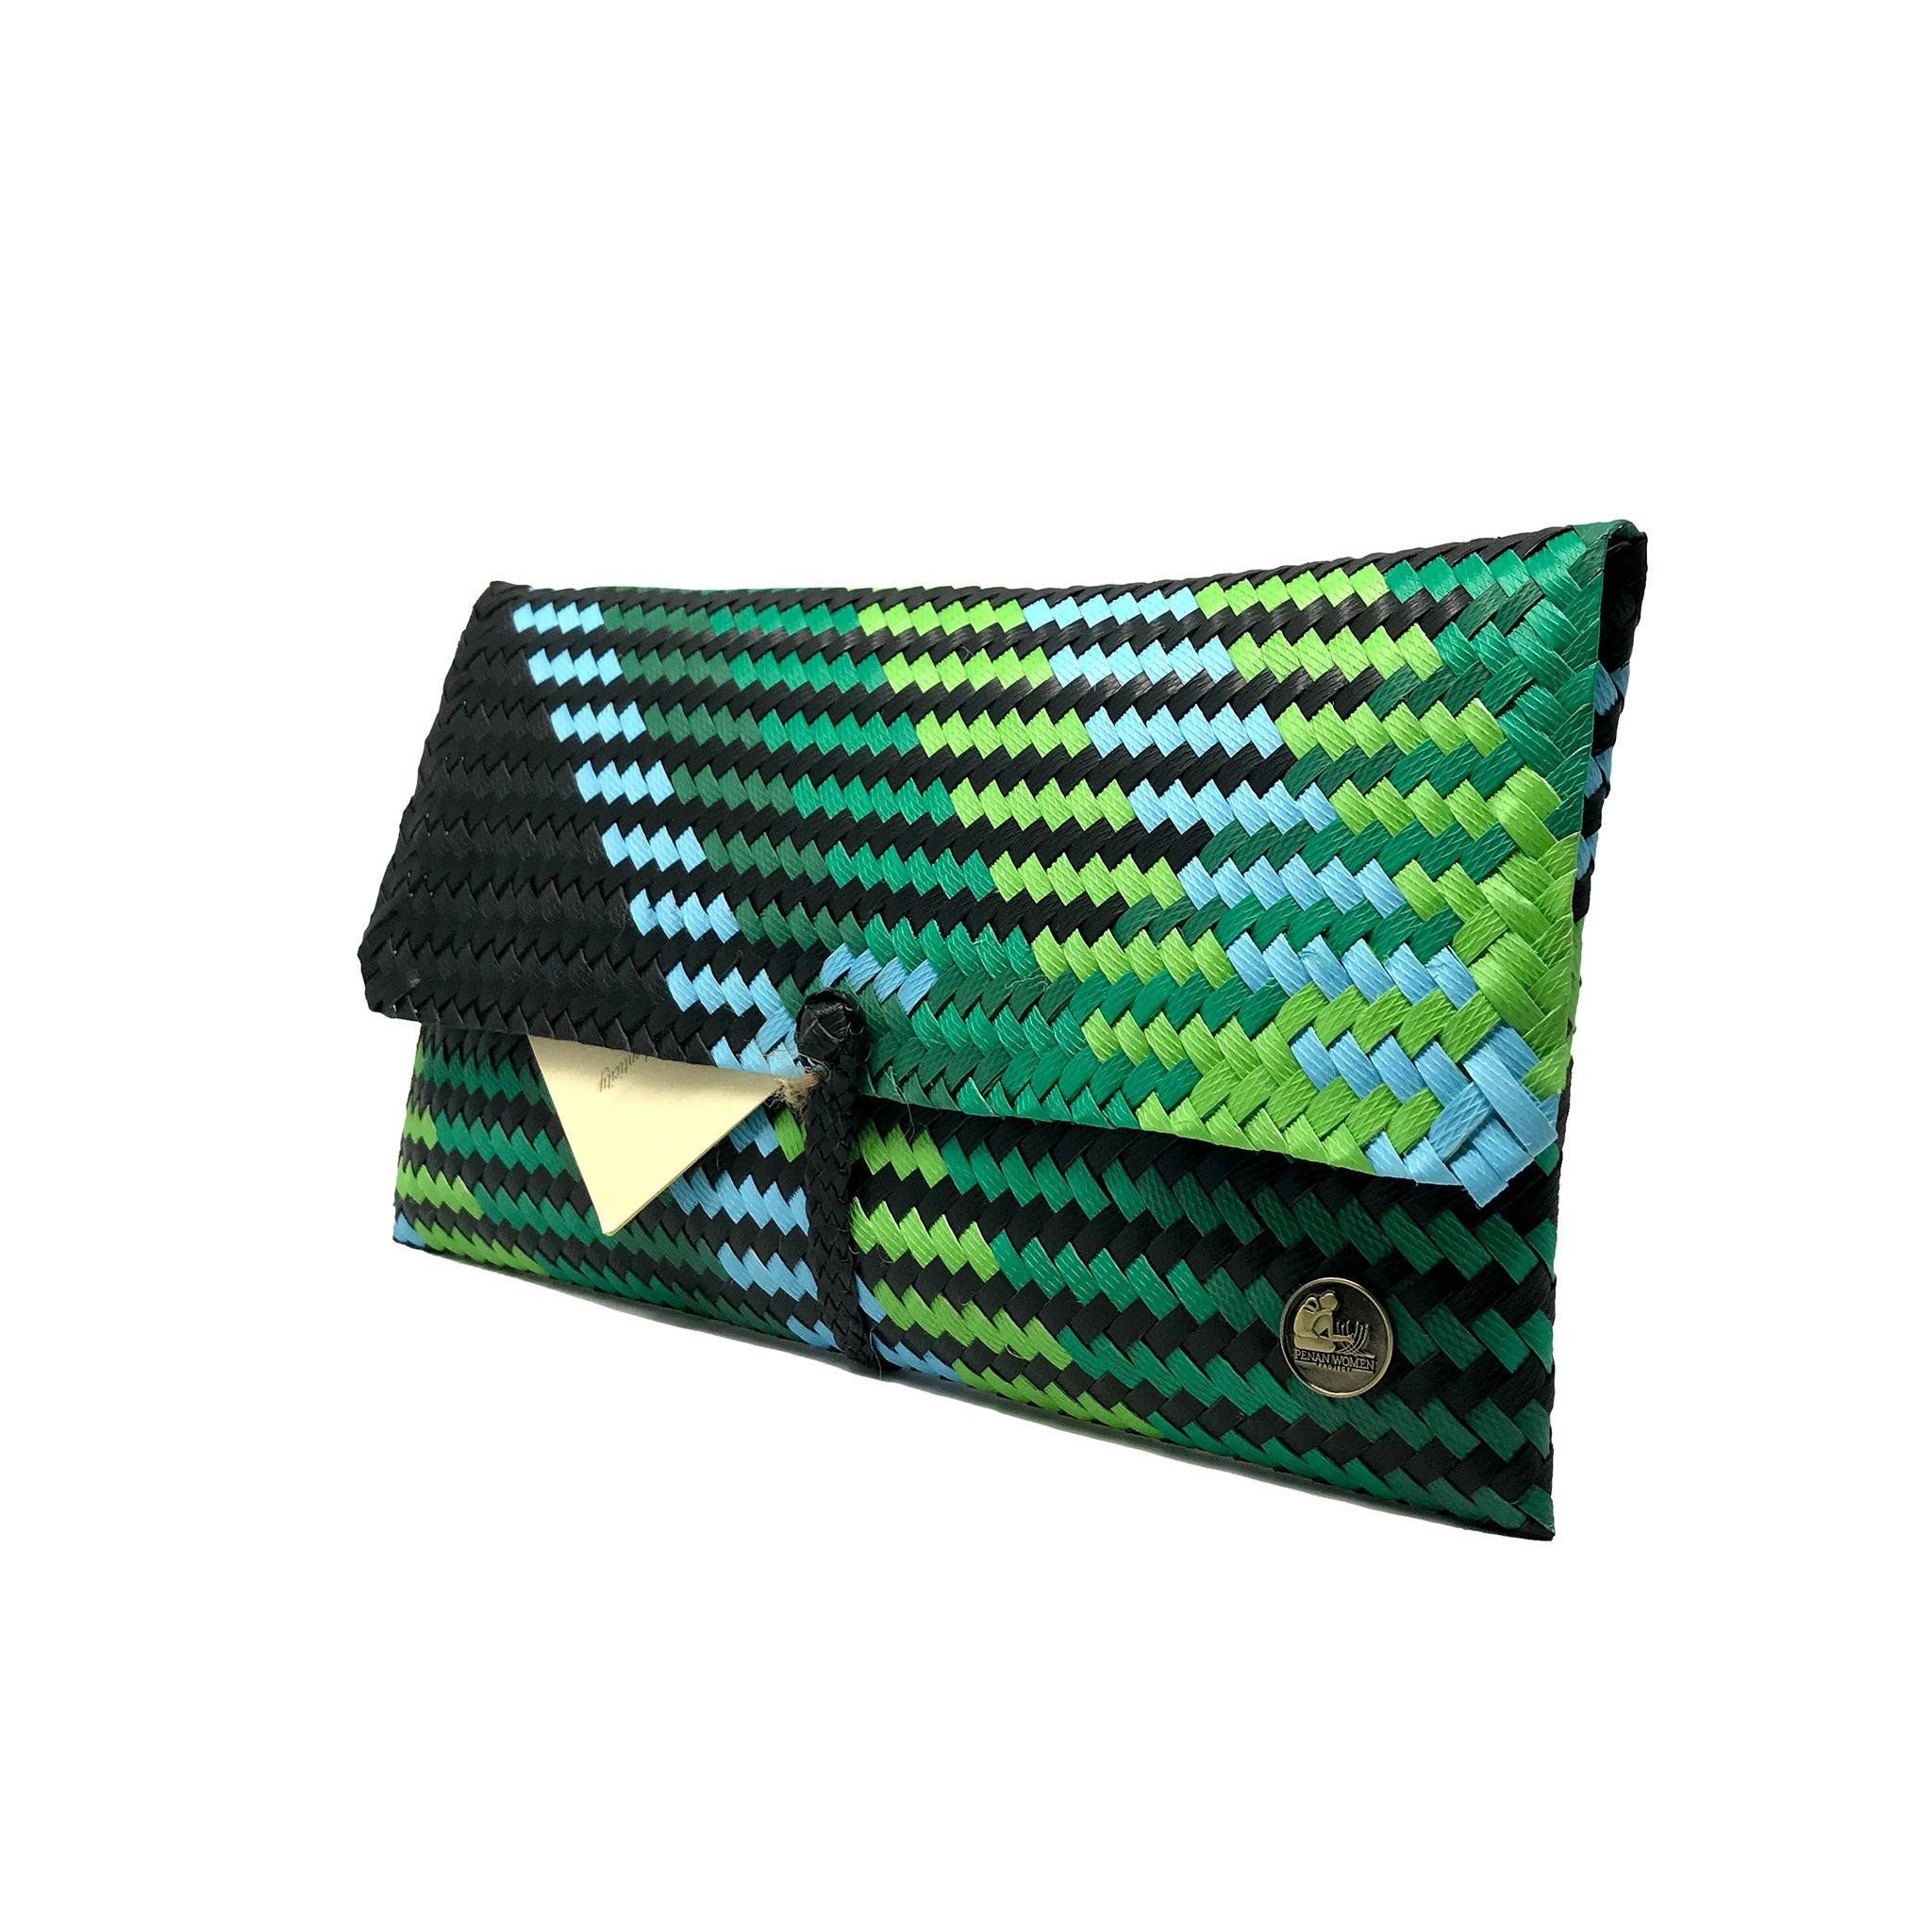 Green, blue and black clutch at a 45-degree angle.